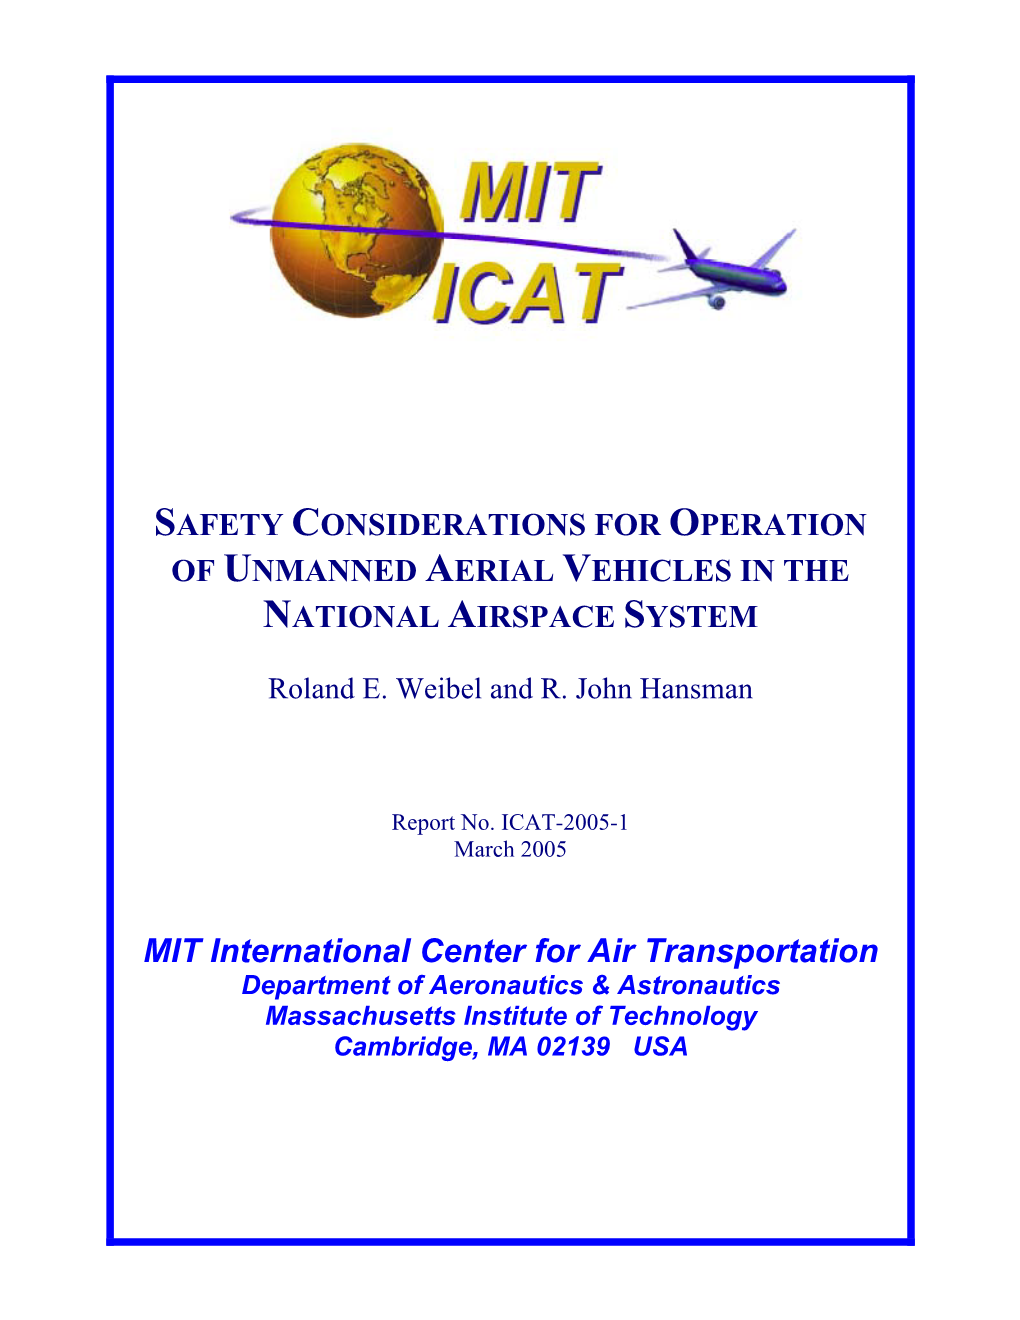 Safety Considerations for Operation of Uavs in the NAS